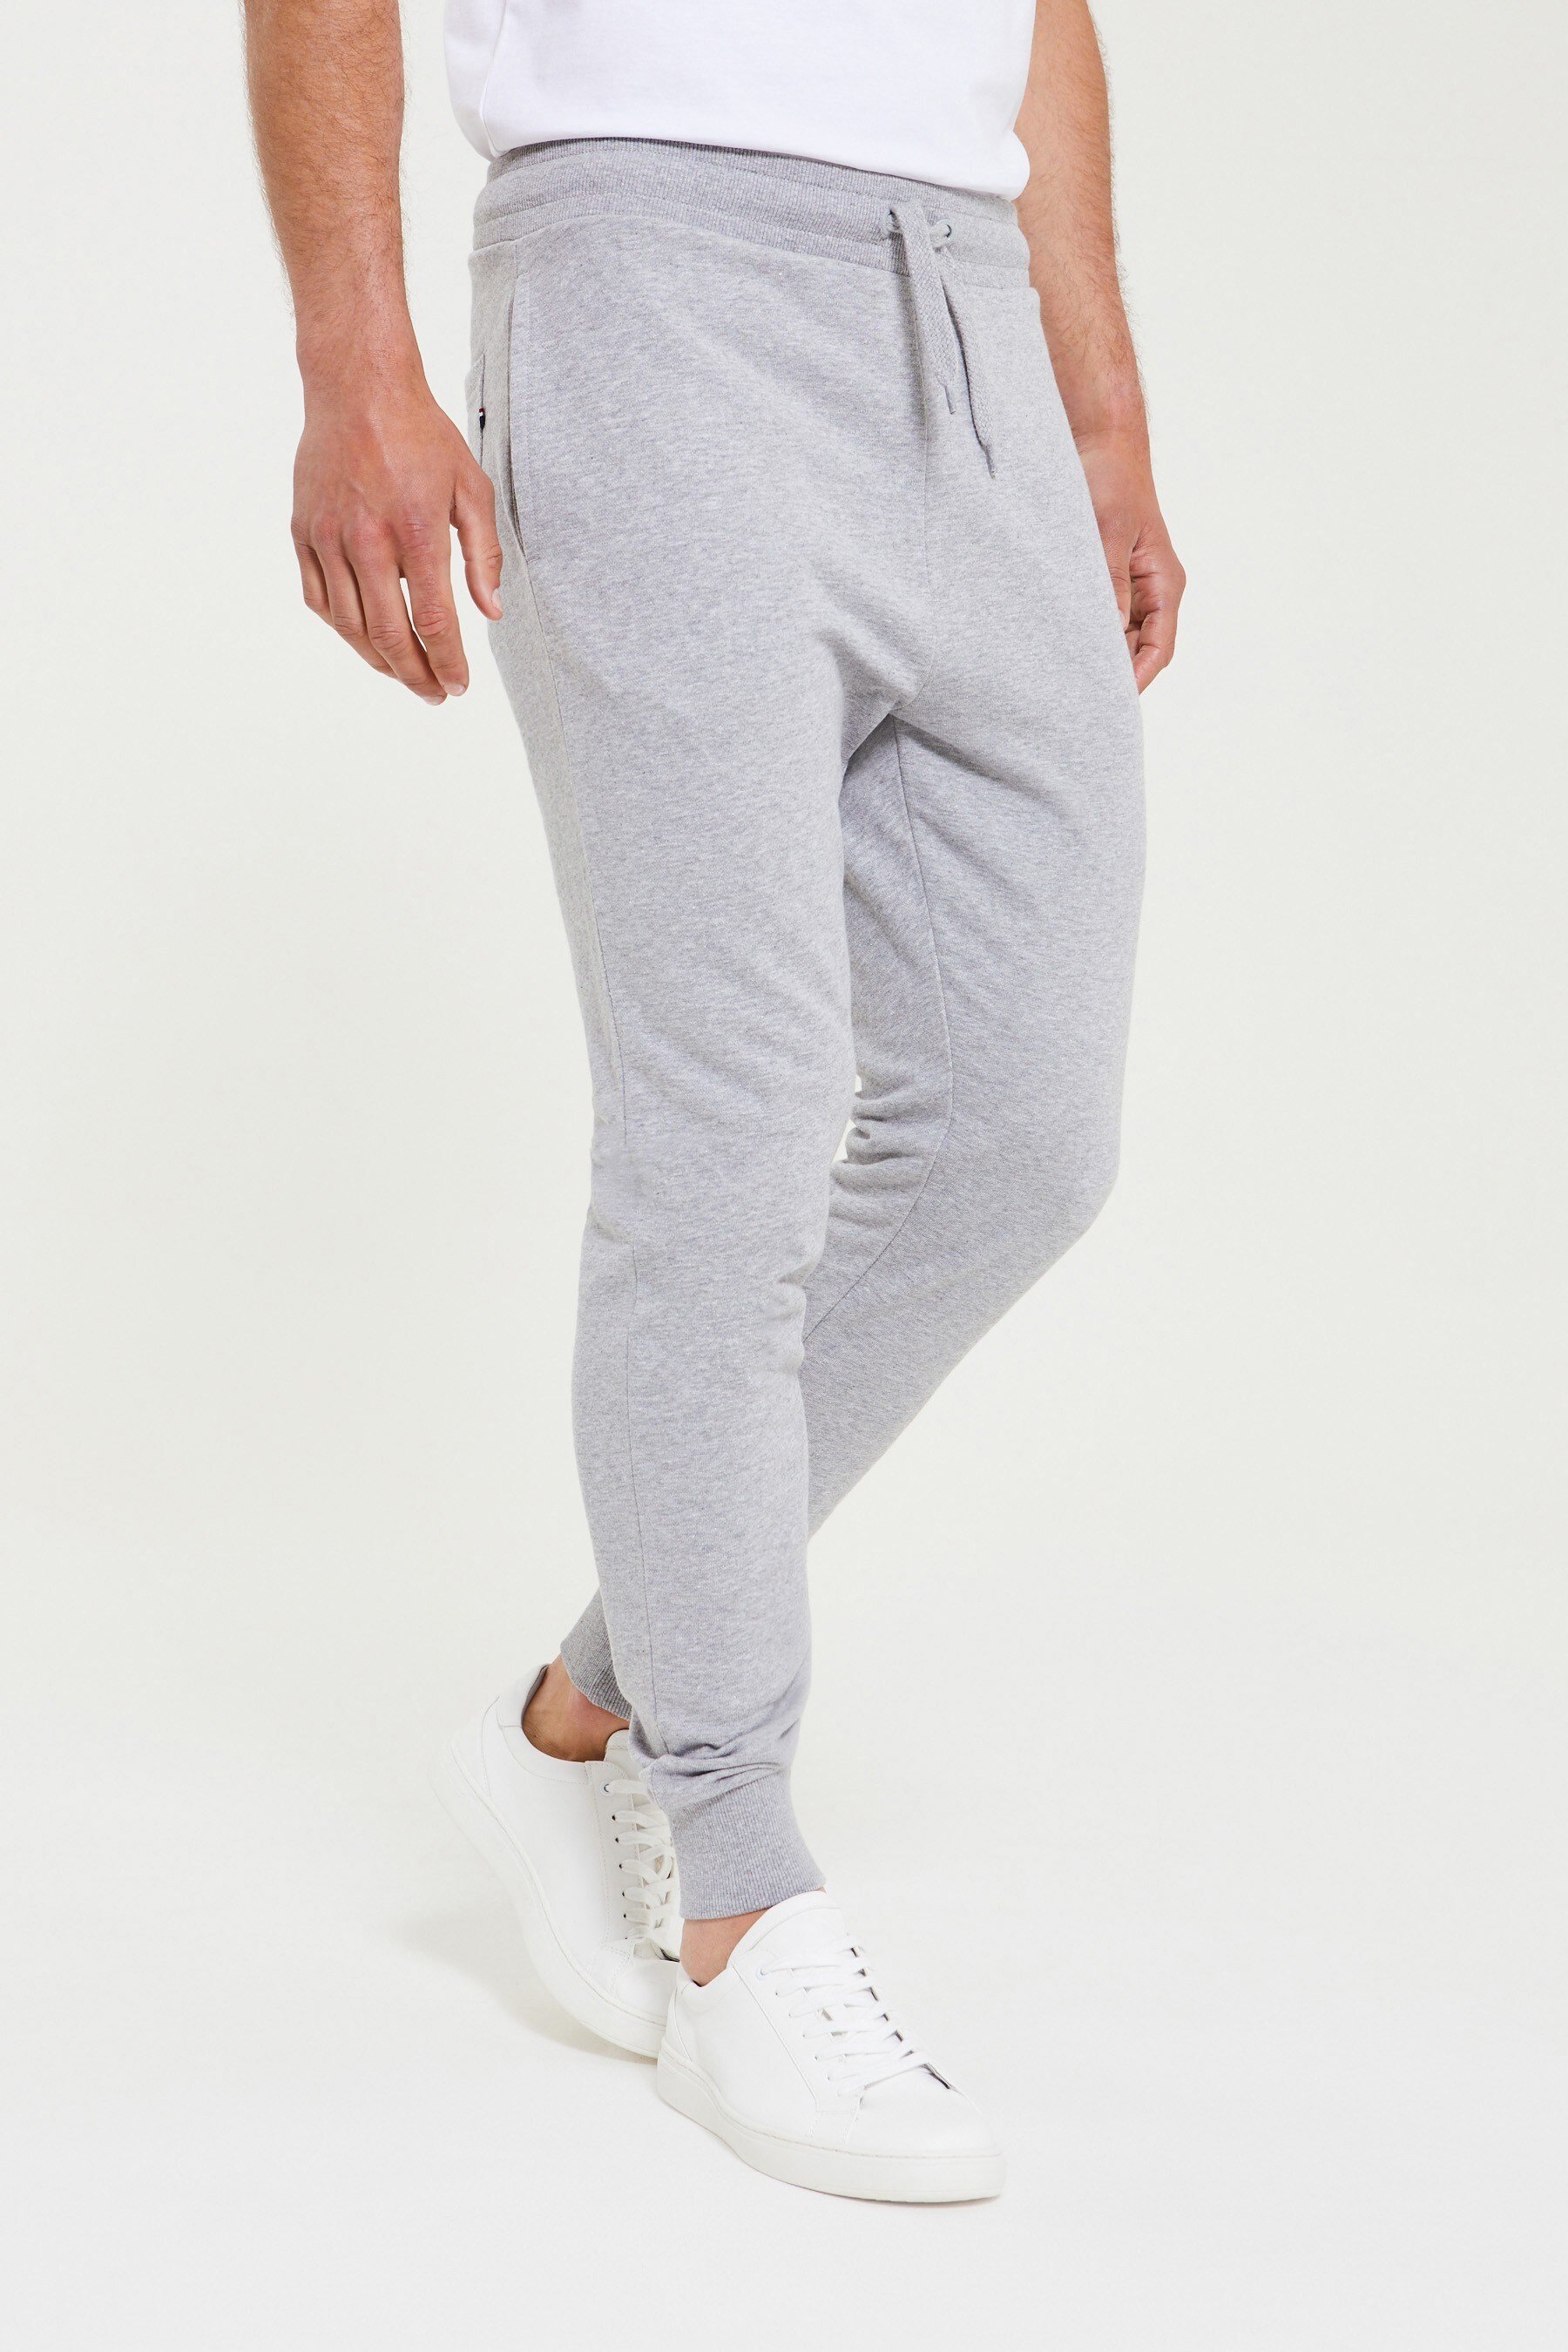 Buy U.S. Polo Assn. Grey Sport Joggers from the Next UK online shop